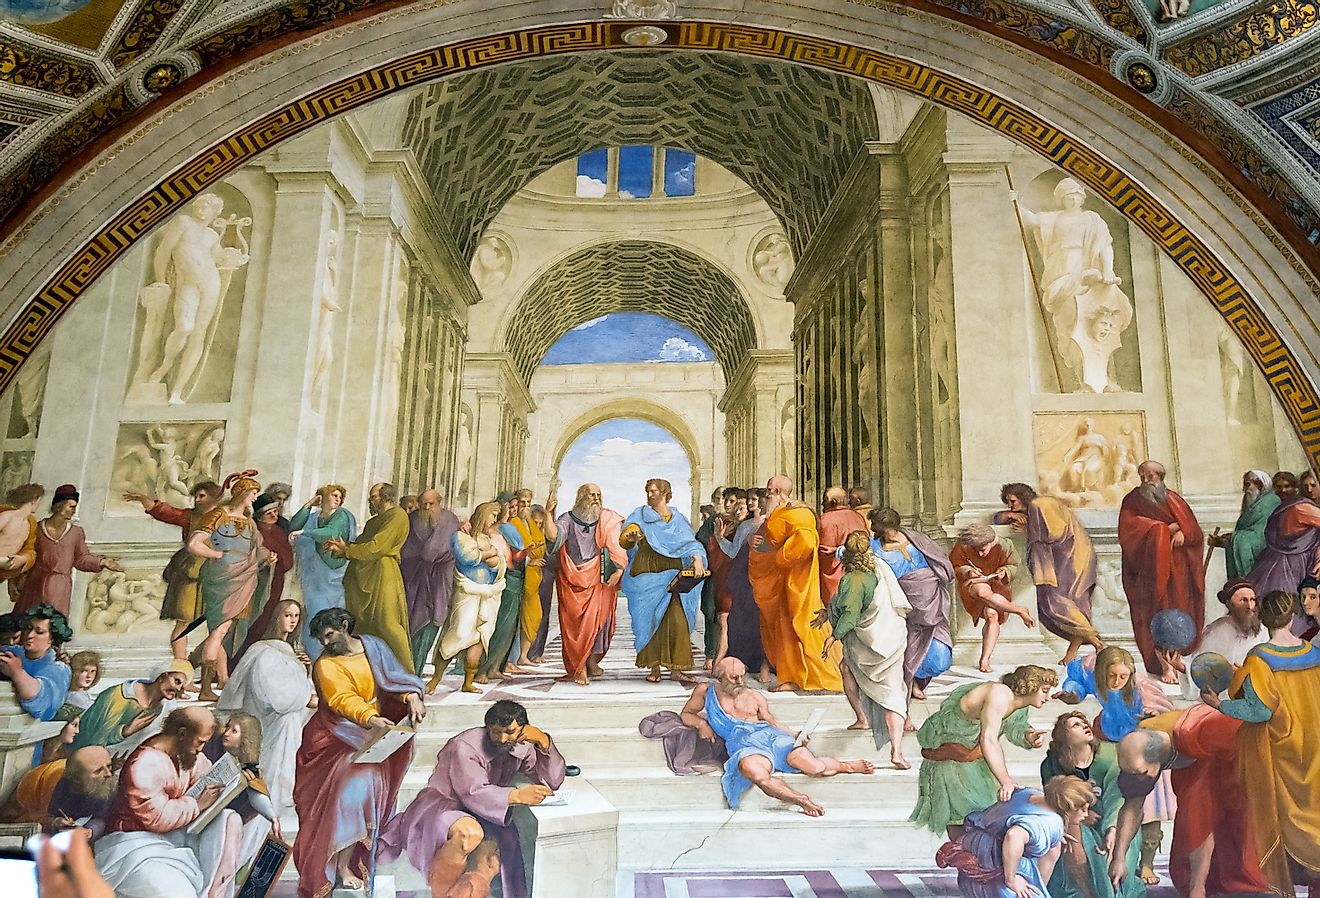  Greek Philosophers in the School of Athens, Raphael Rooms, Apostolic Palace, Vatican City.